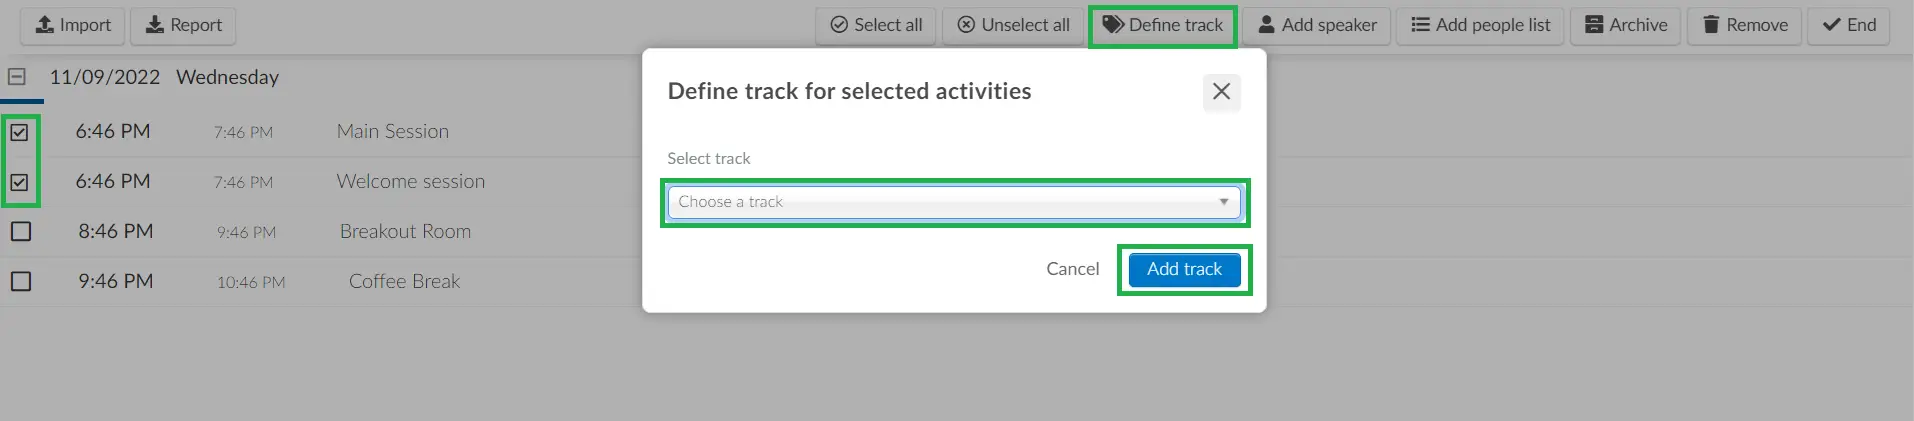 Add tracks to multiple activities